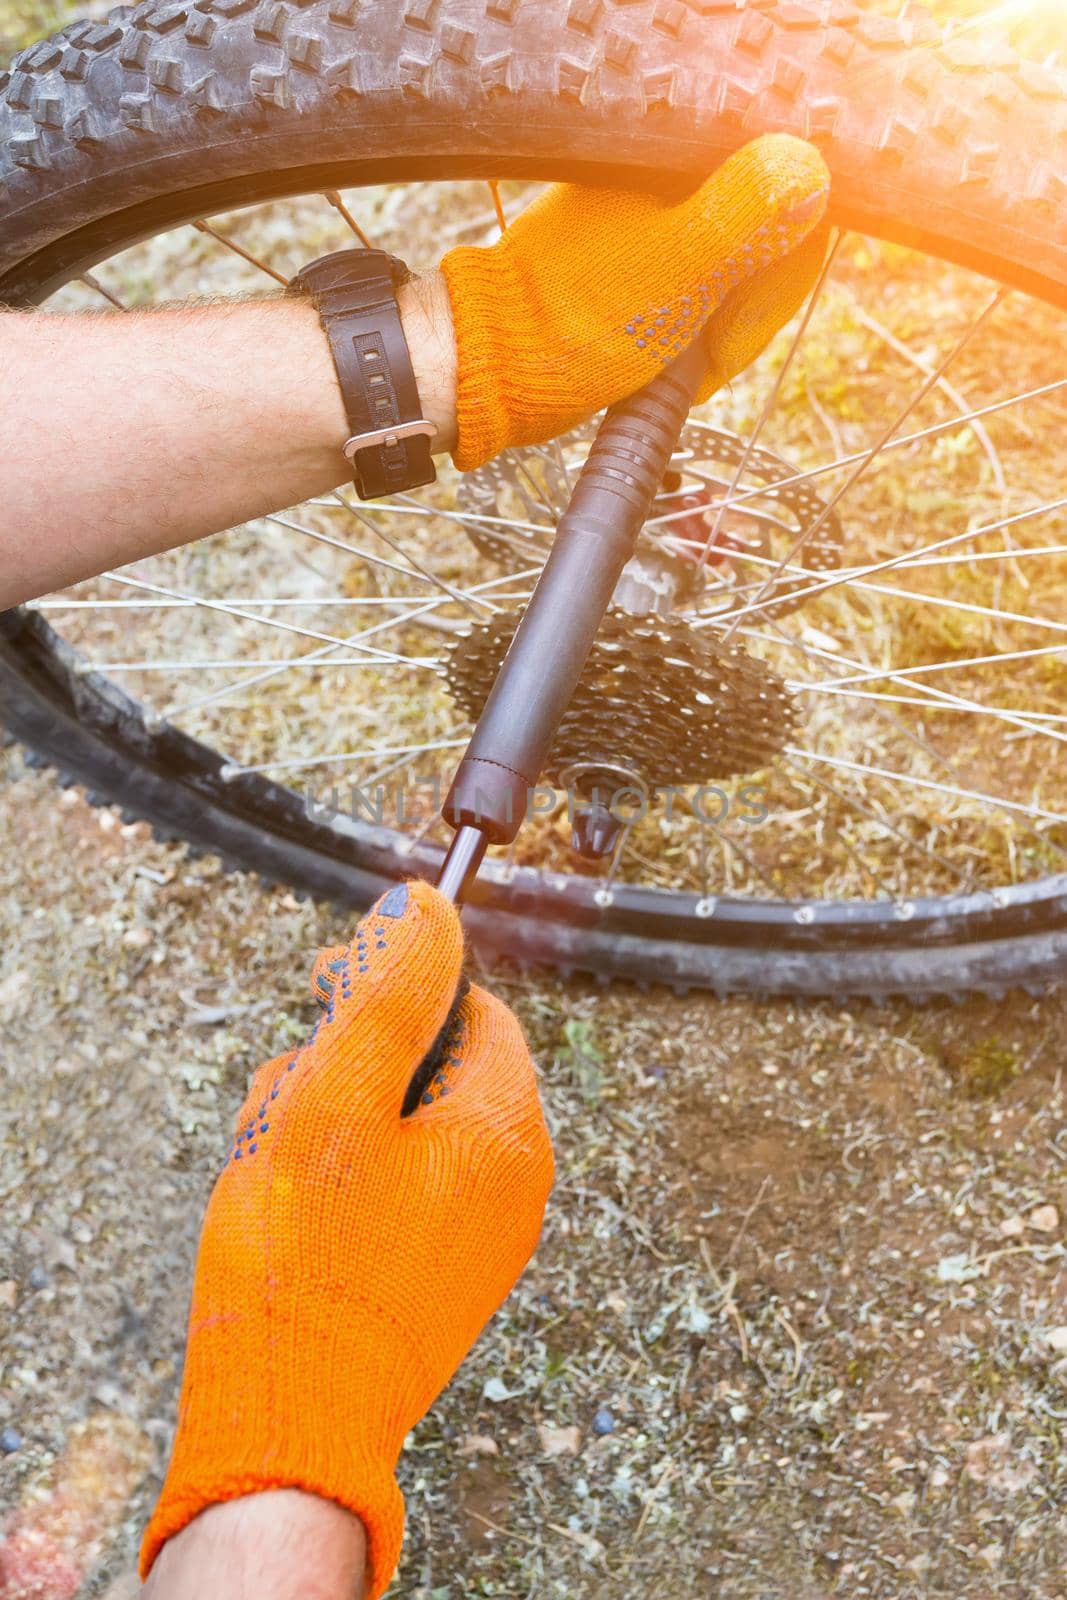 Closeup of mechanic pumping a bicycle tire. Toned image